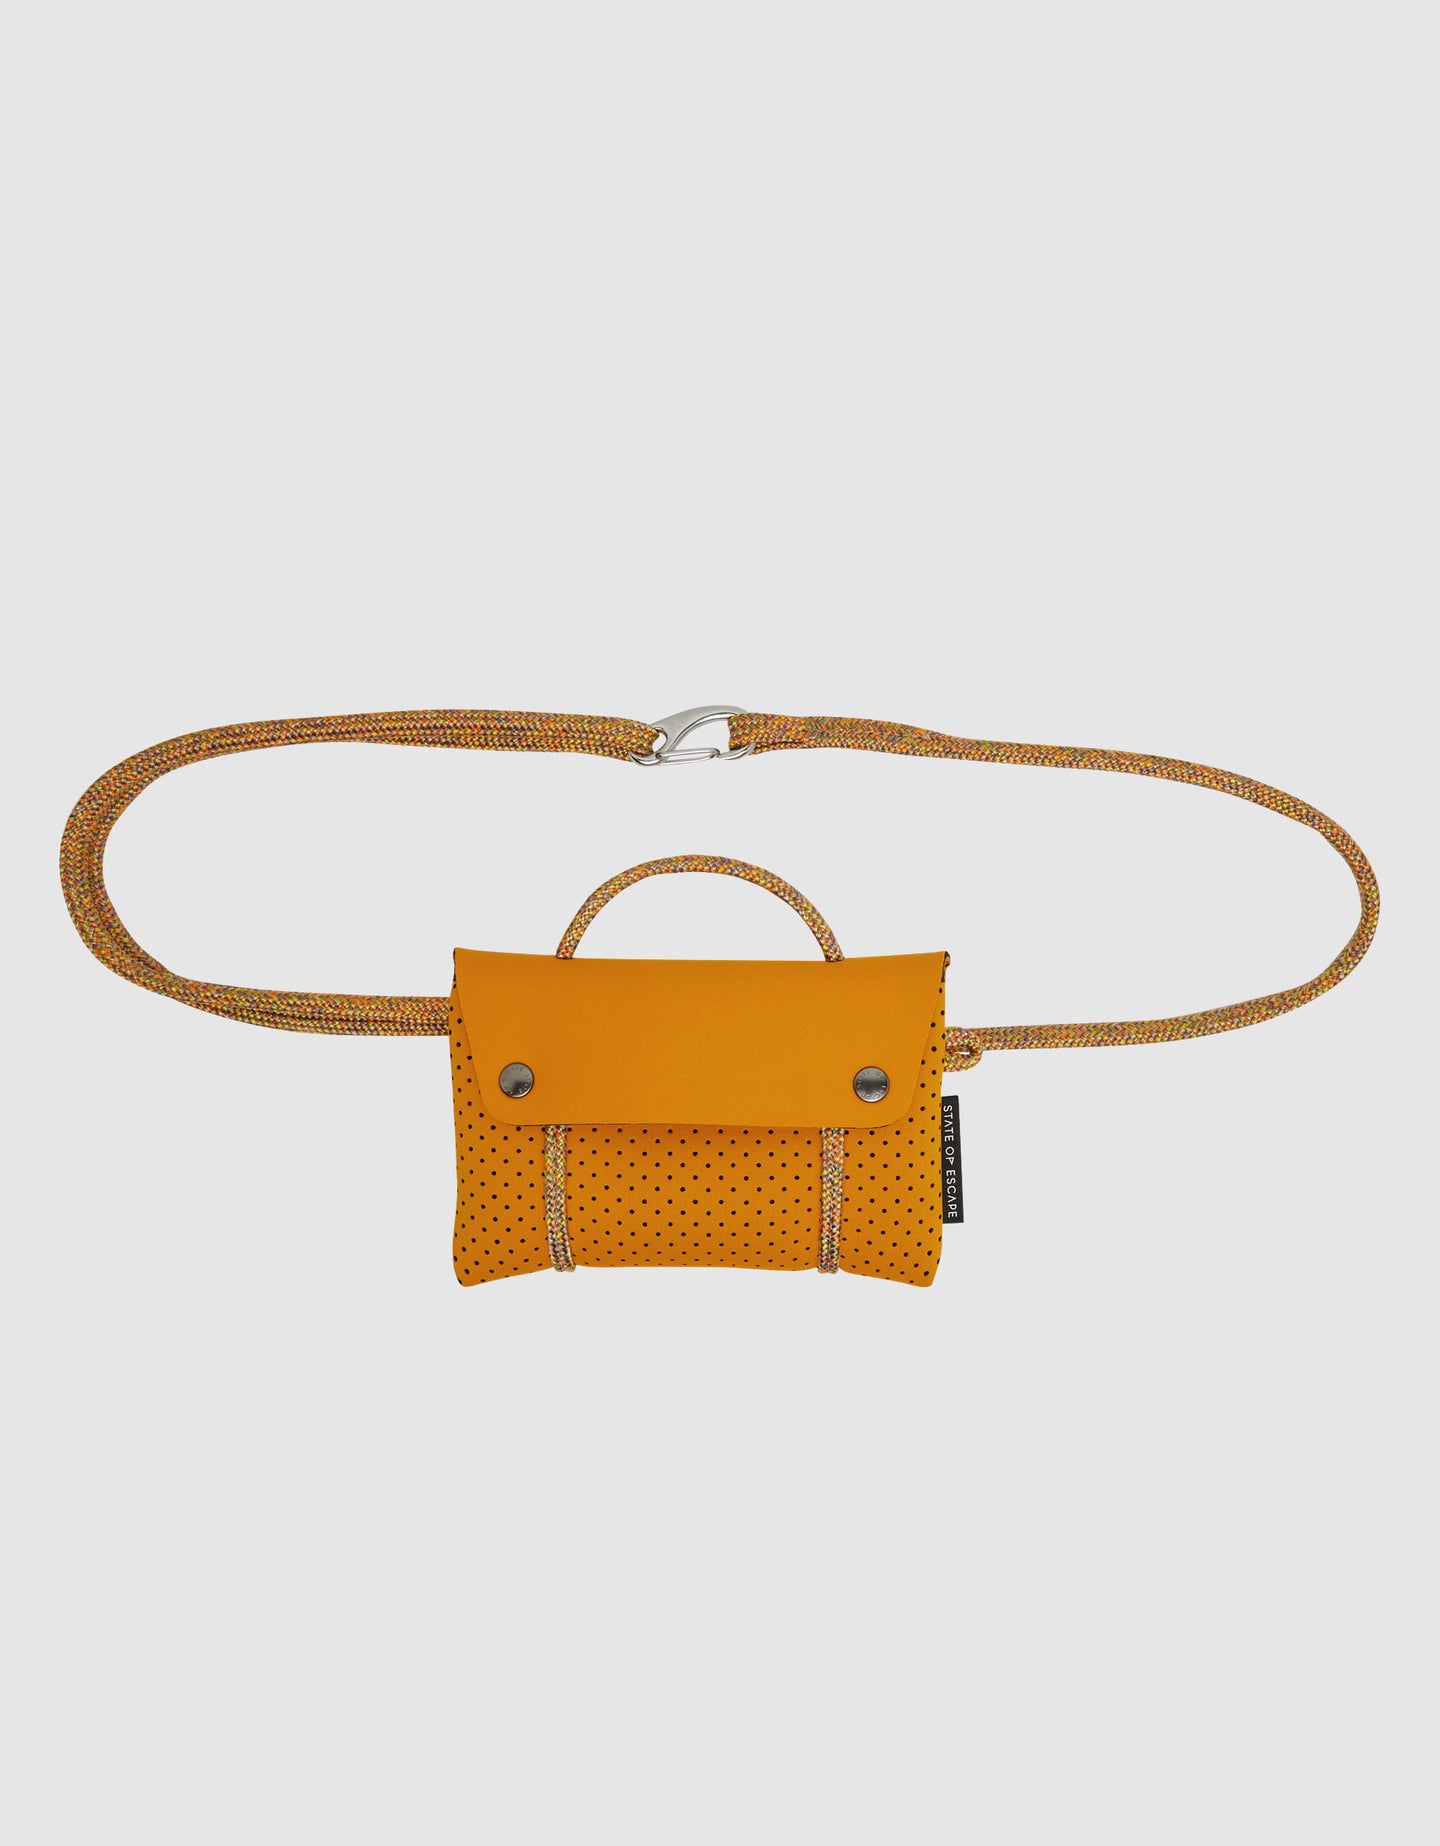 Compass belt bag in mustard – State of Escape